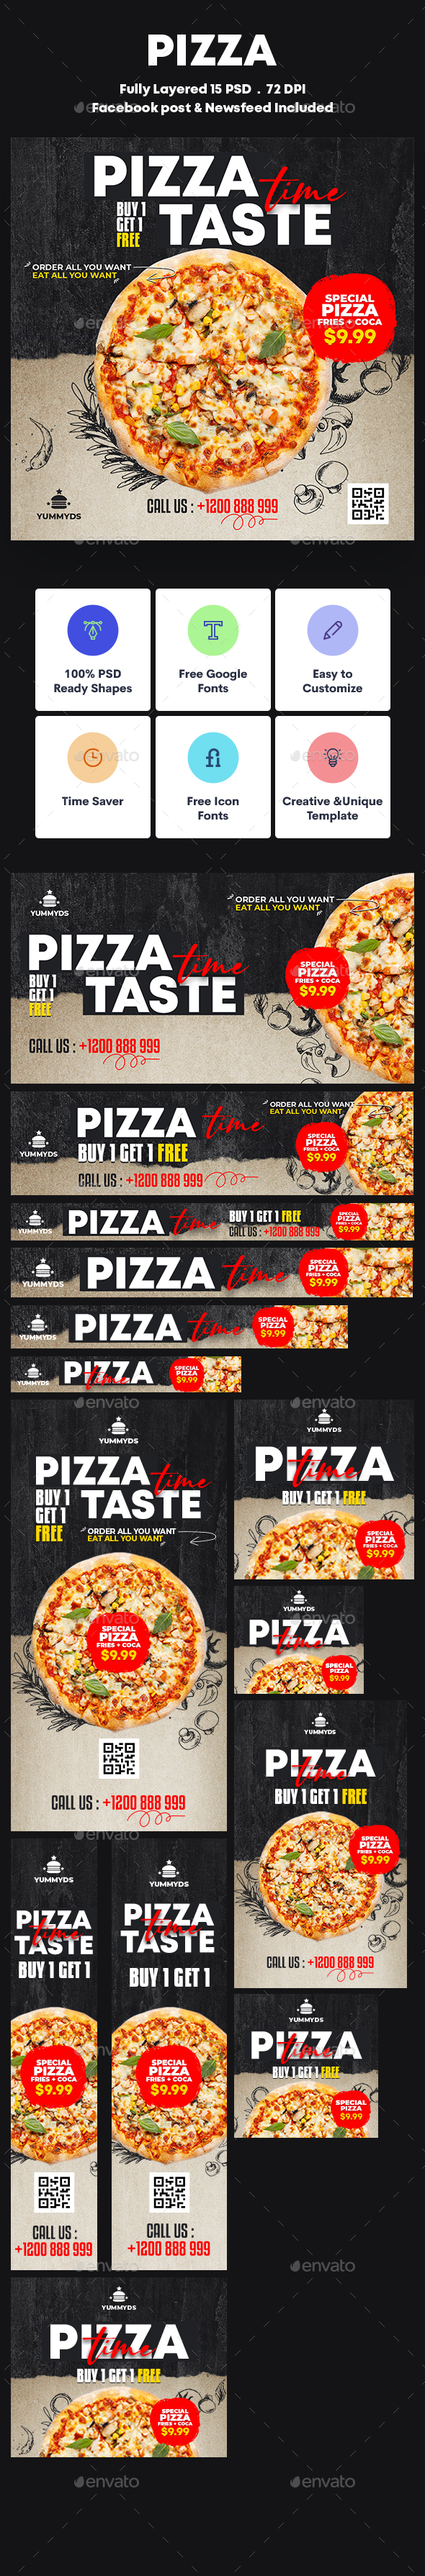 Pizza Time Banners Ad